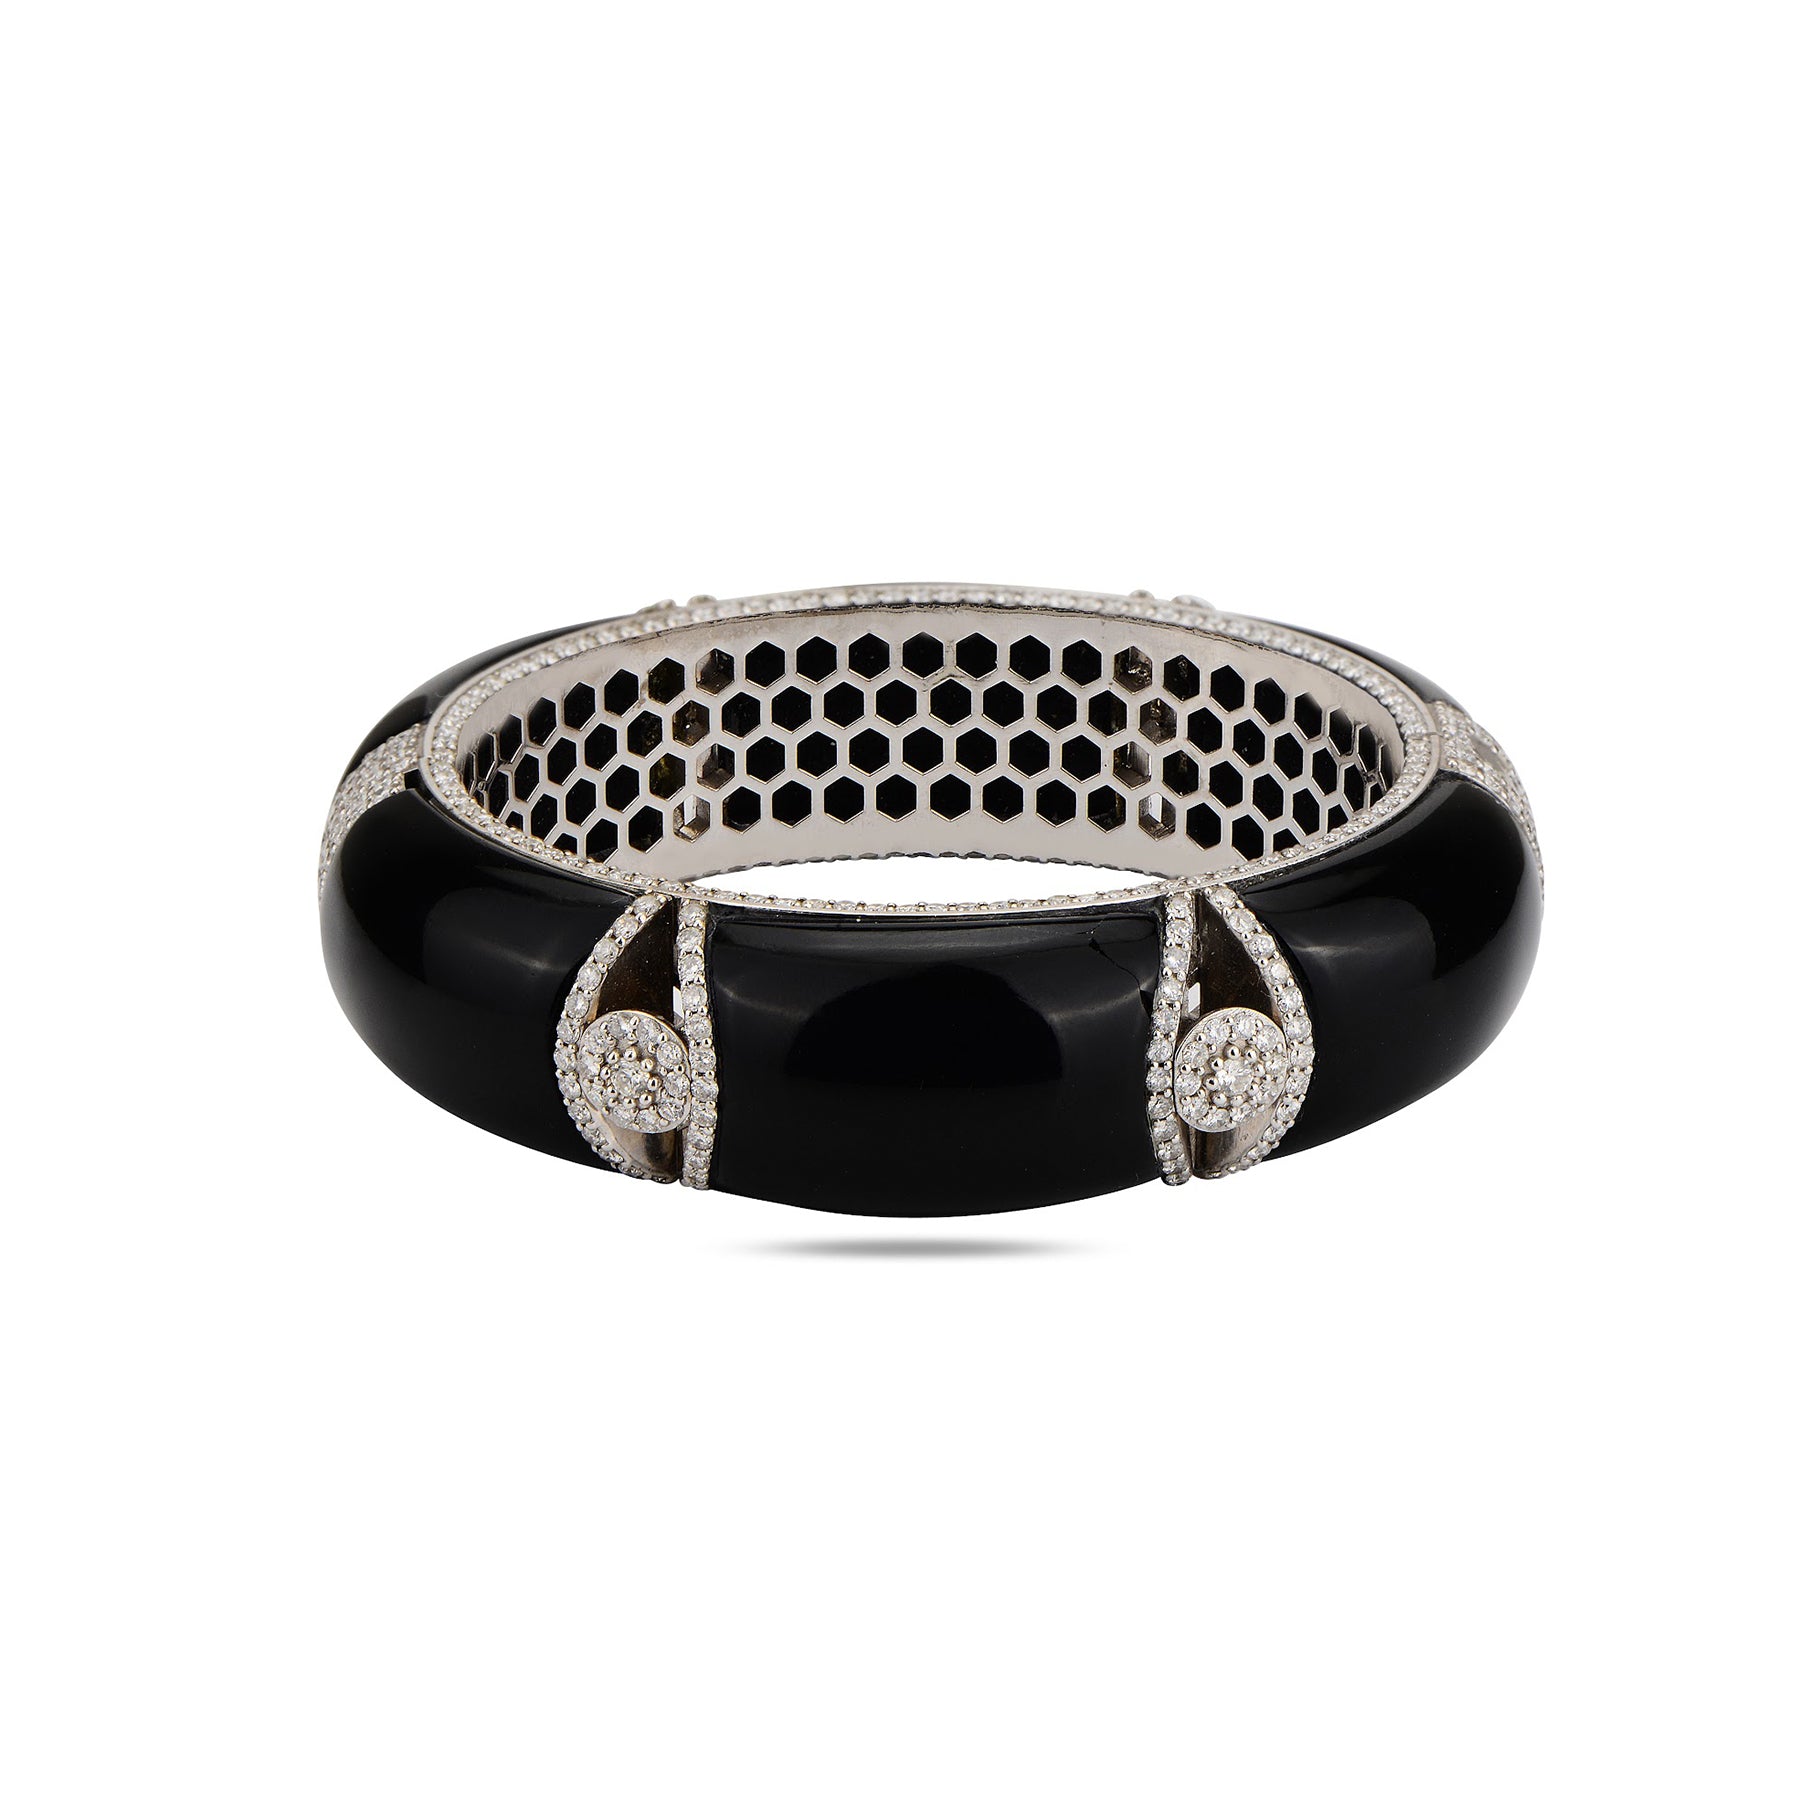 Neutra Dome Cuff with Black Onyx, Limited Edition